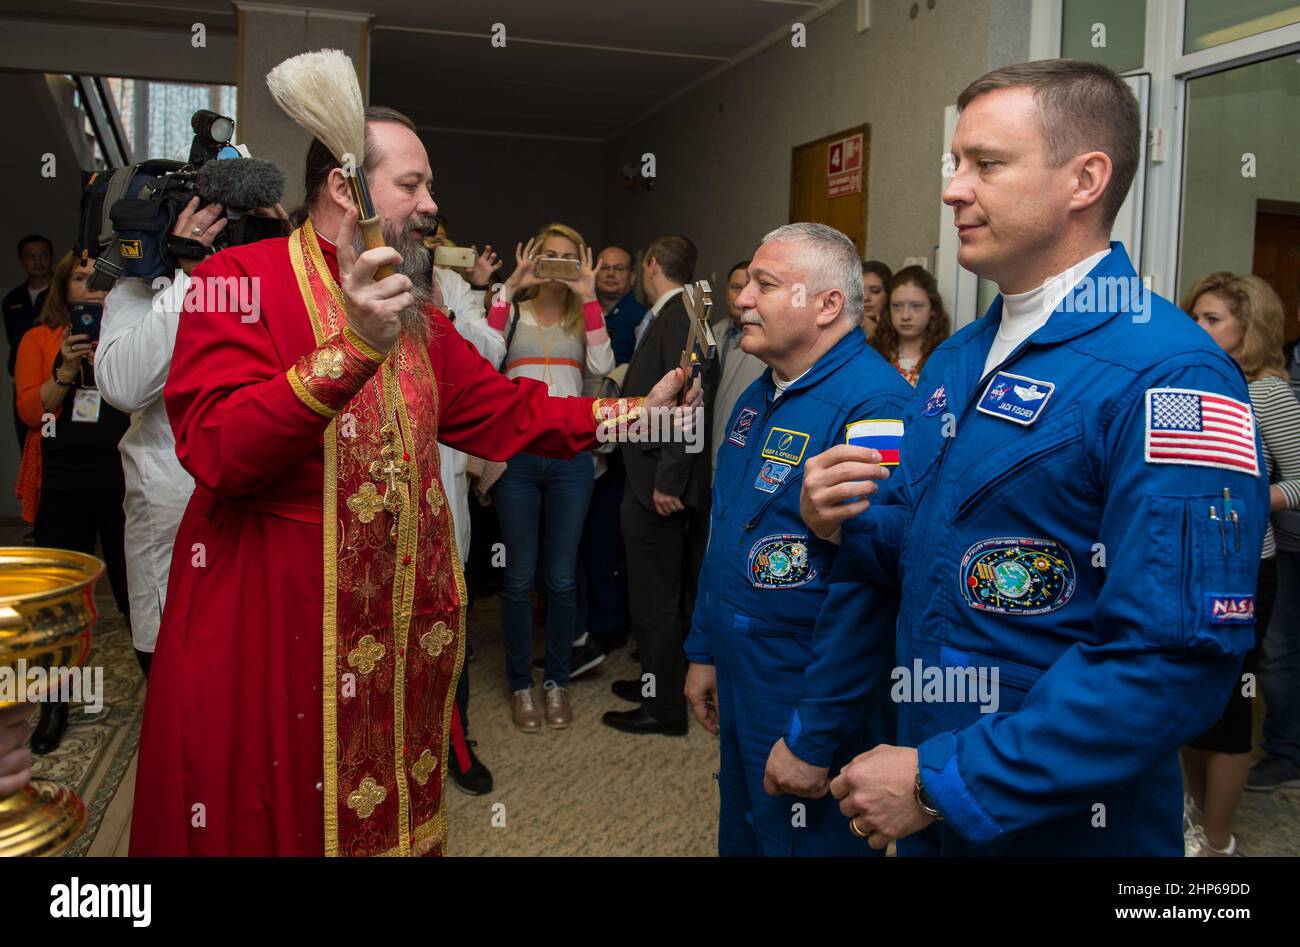 Expedition 51 Soyuz Commander Fyodor Yurchikhin of Roscosmos, left, receives the traditional blessing from a Russian Orthodox priest at the Cosmonaut Hotel prior to his launch on the Soyuz rocket to the International Space Station (ISS), Thursday, April 20, 2017, in Baikonur, Kazakhstan. He and fellow crew mate, Flight Engineer Jack Fischer of NASA, right, will spend the next four and a half months living and working aboard the ISS. Stock Photo